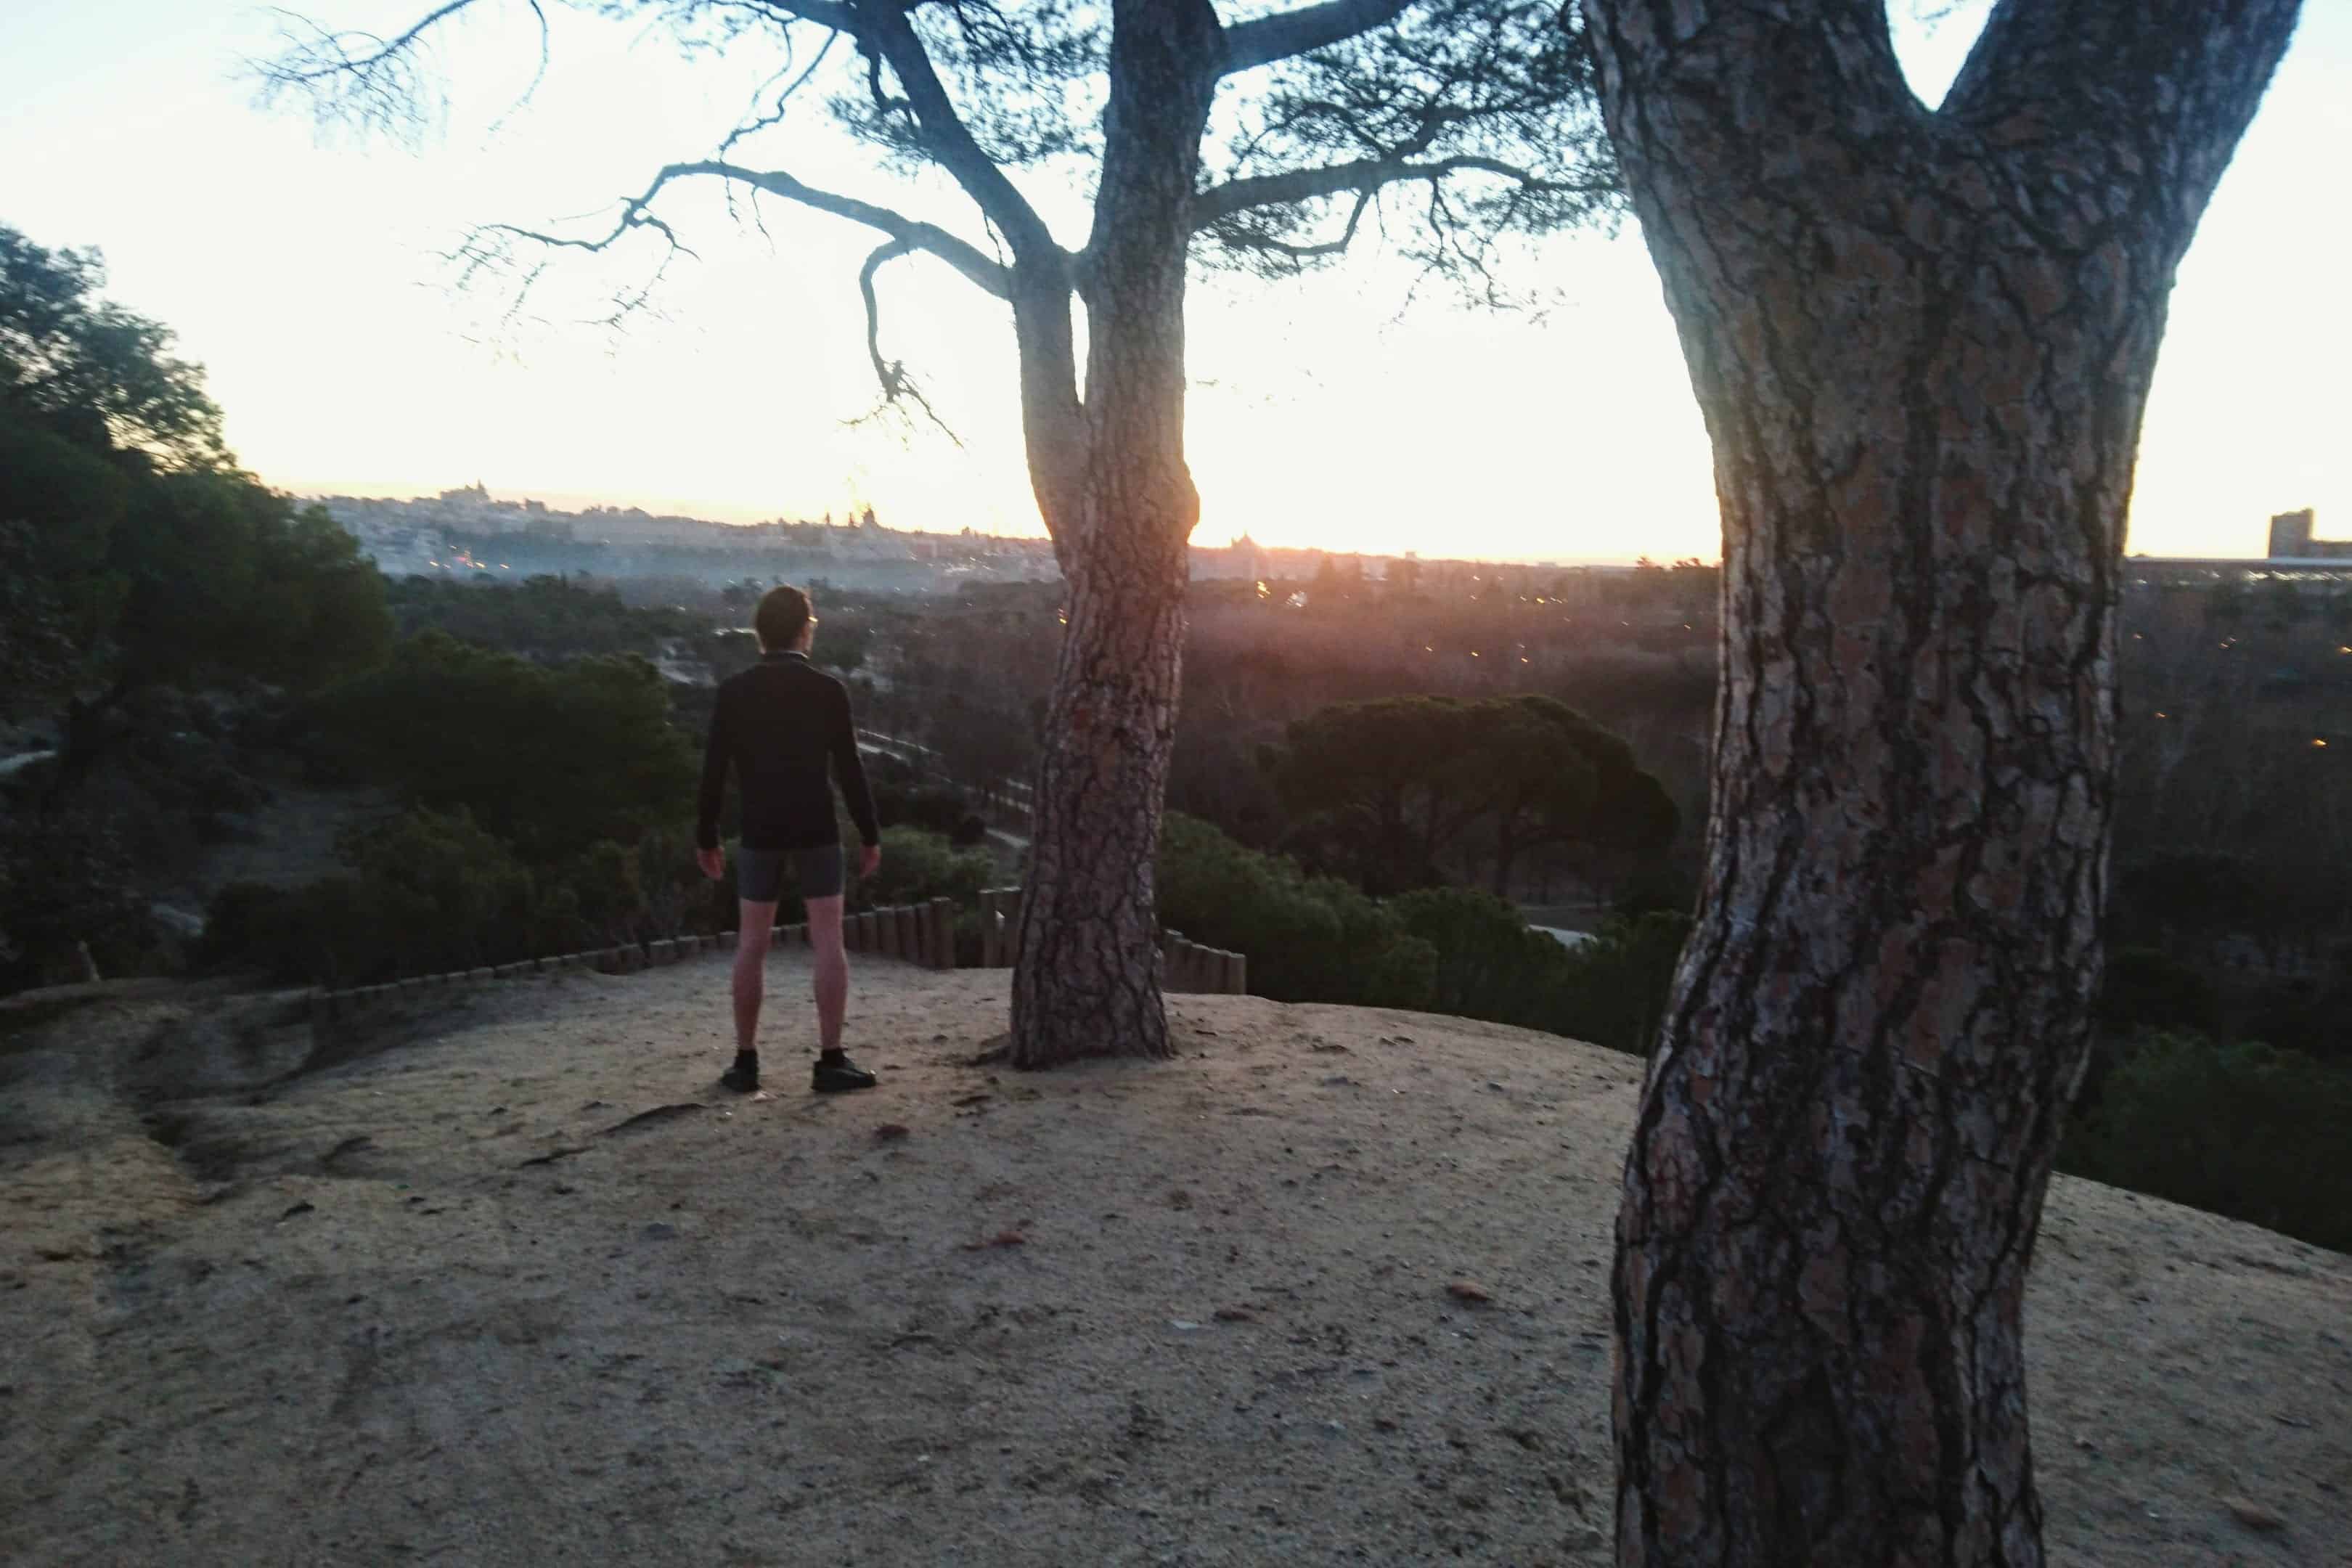 Carlos Eriksson standing and overlooking the sunrise from the hilltops of Casa de Campo, Madrid, Spain.